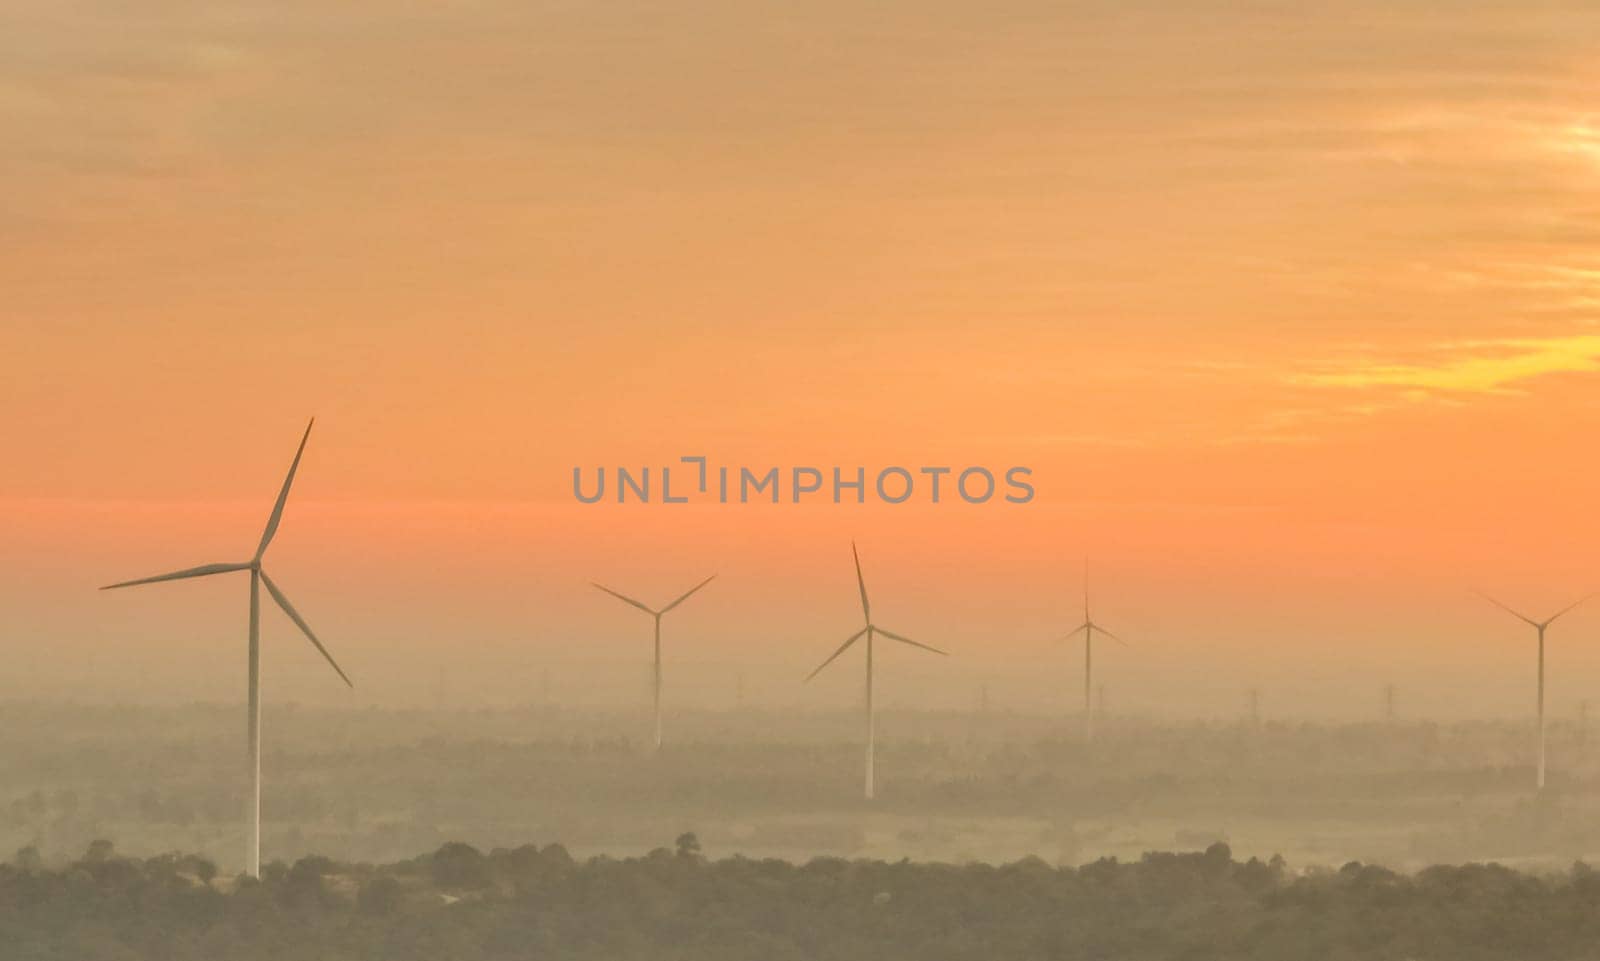 Landscape wind farm with sunrise sky. Sustainable renewable energy. Wind power for sustainability. Green technology. Sustainable development. Wind turbines generate electricity. Energy sustainability. by Fahroni